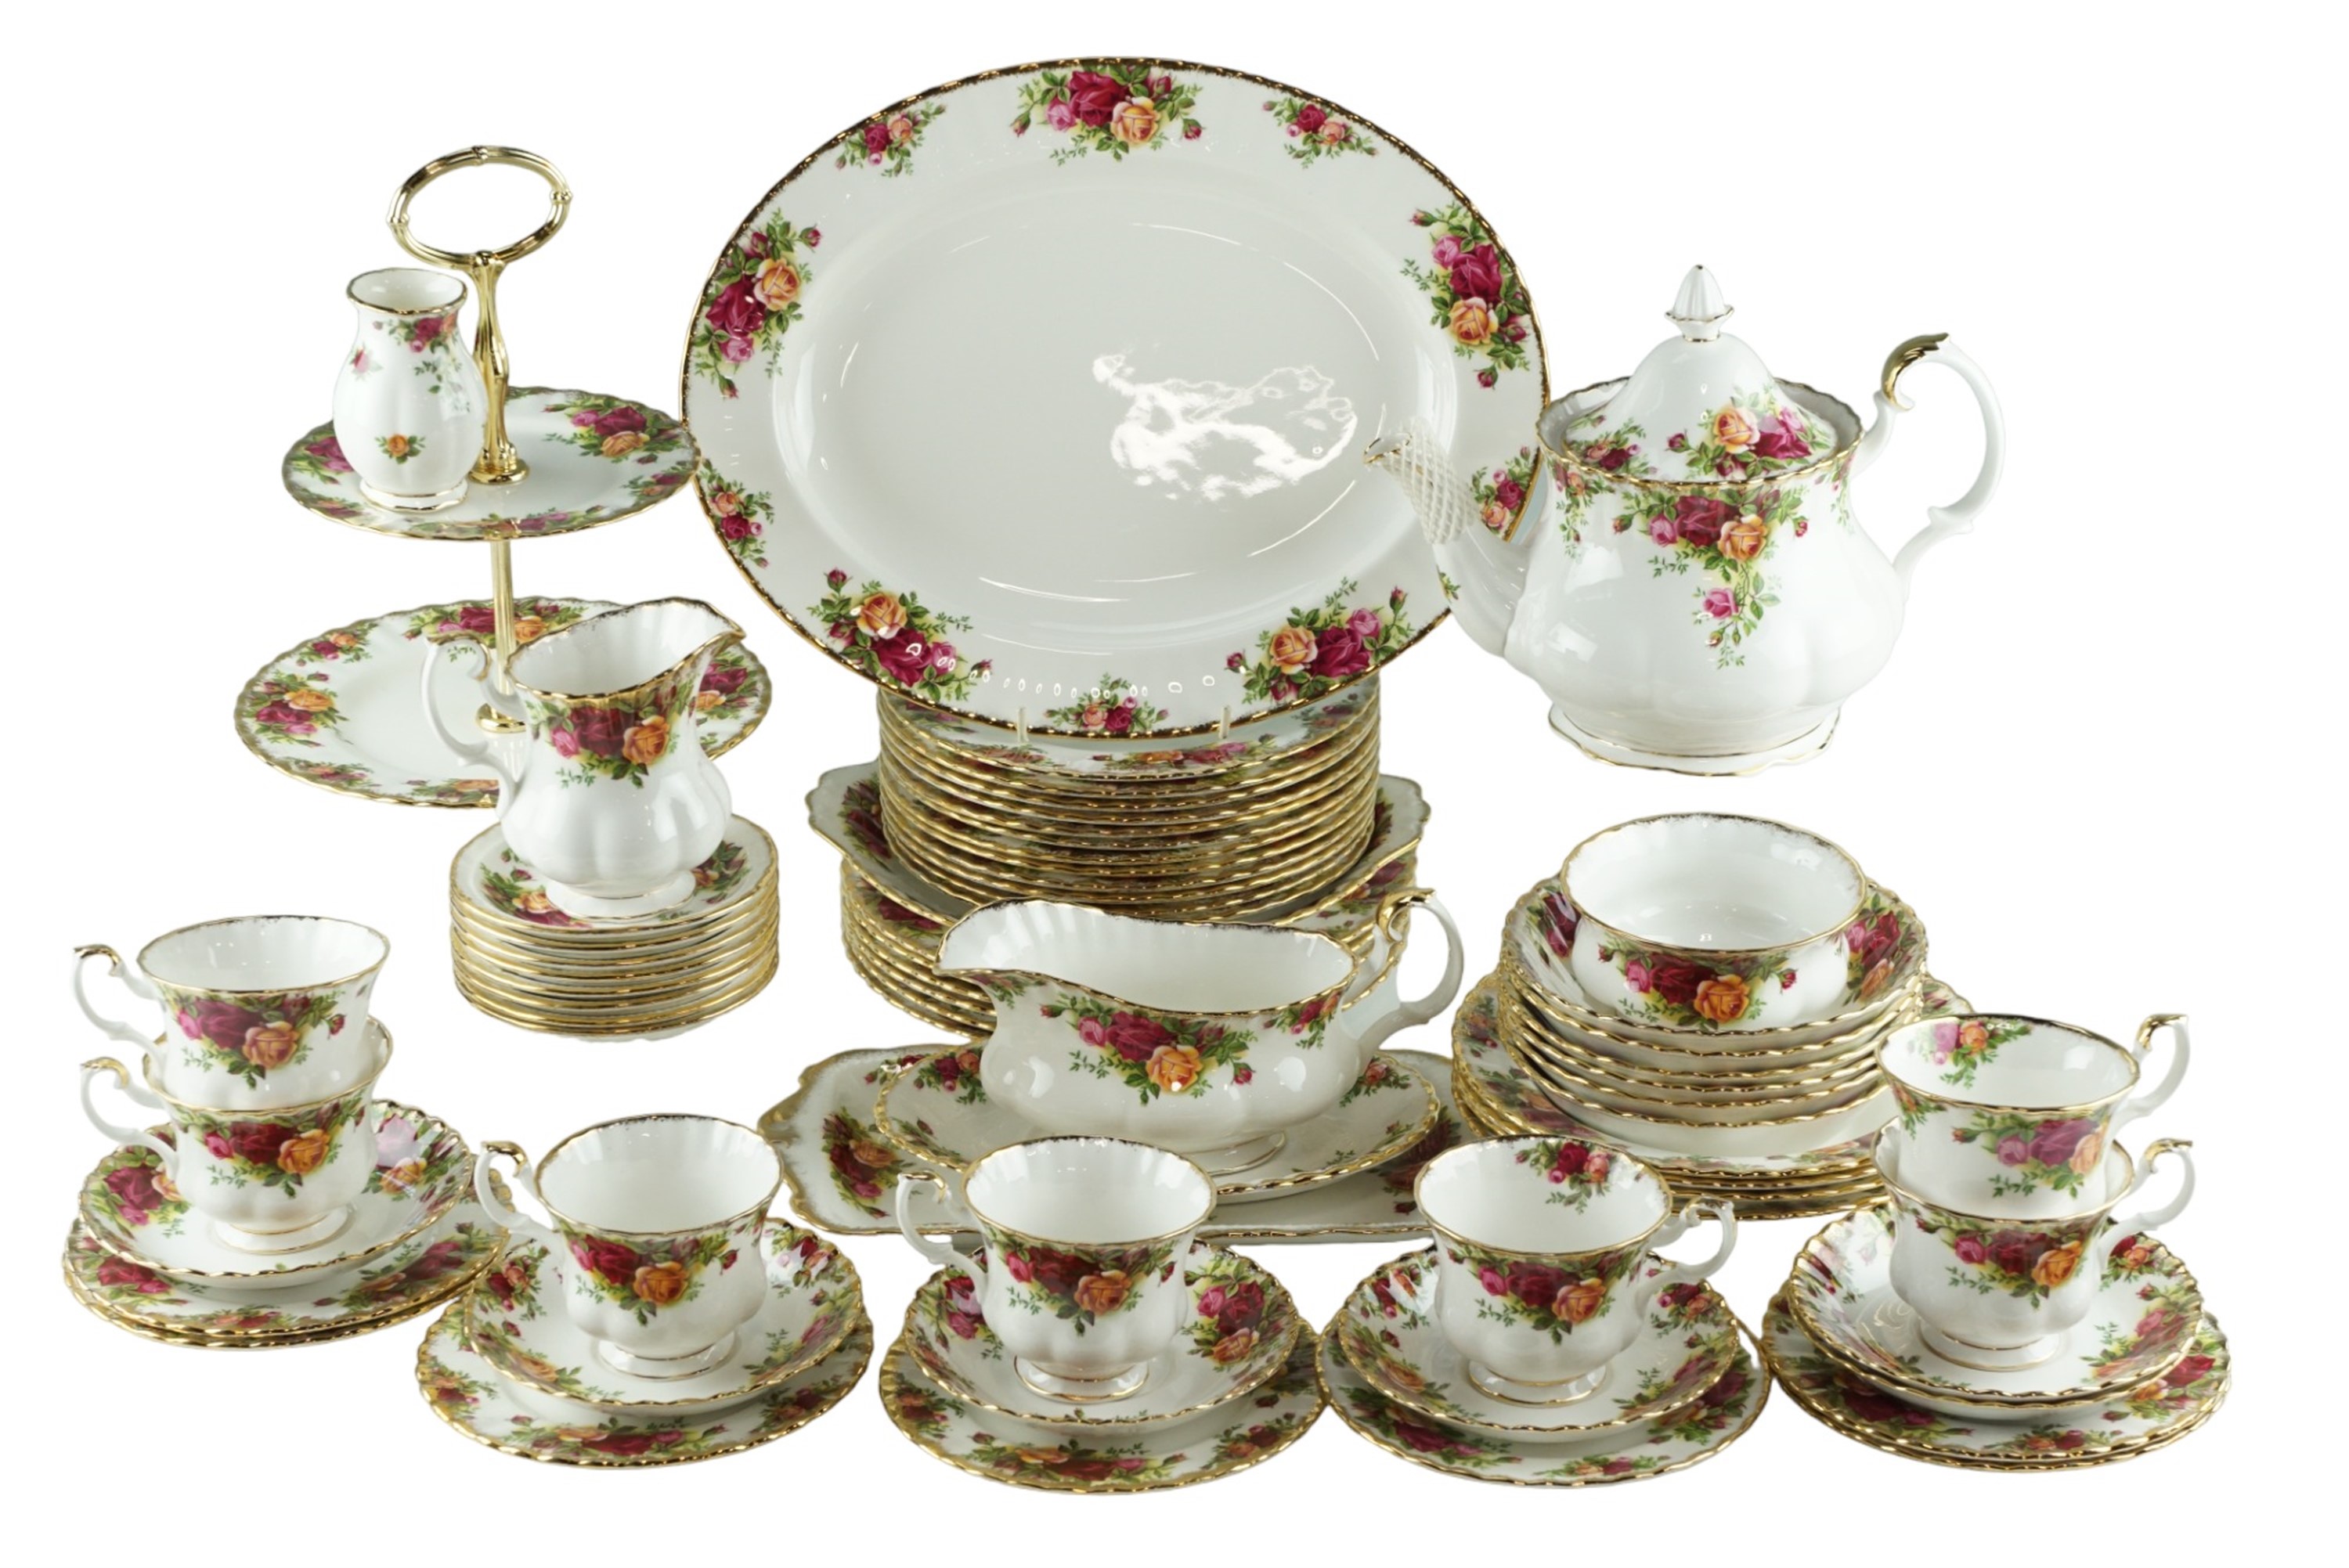 A quantity of Royal Albert Old Country Roses tea and dinnerware, over 50 items